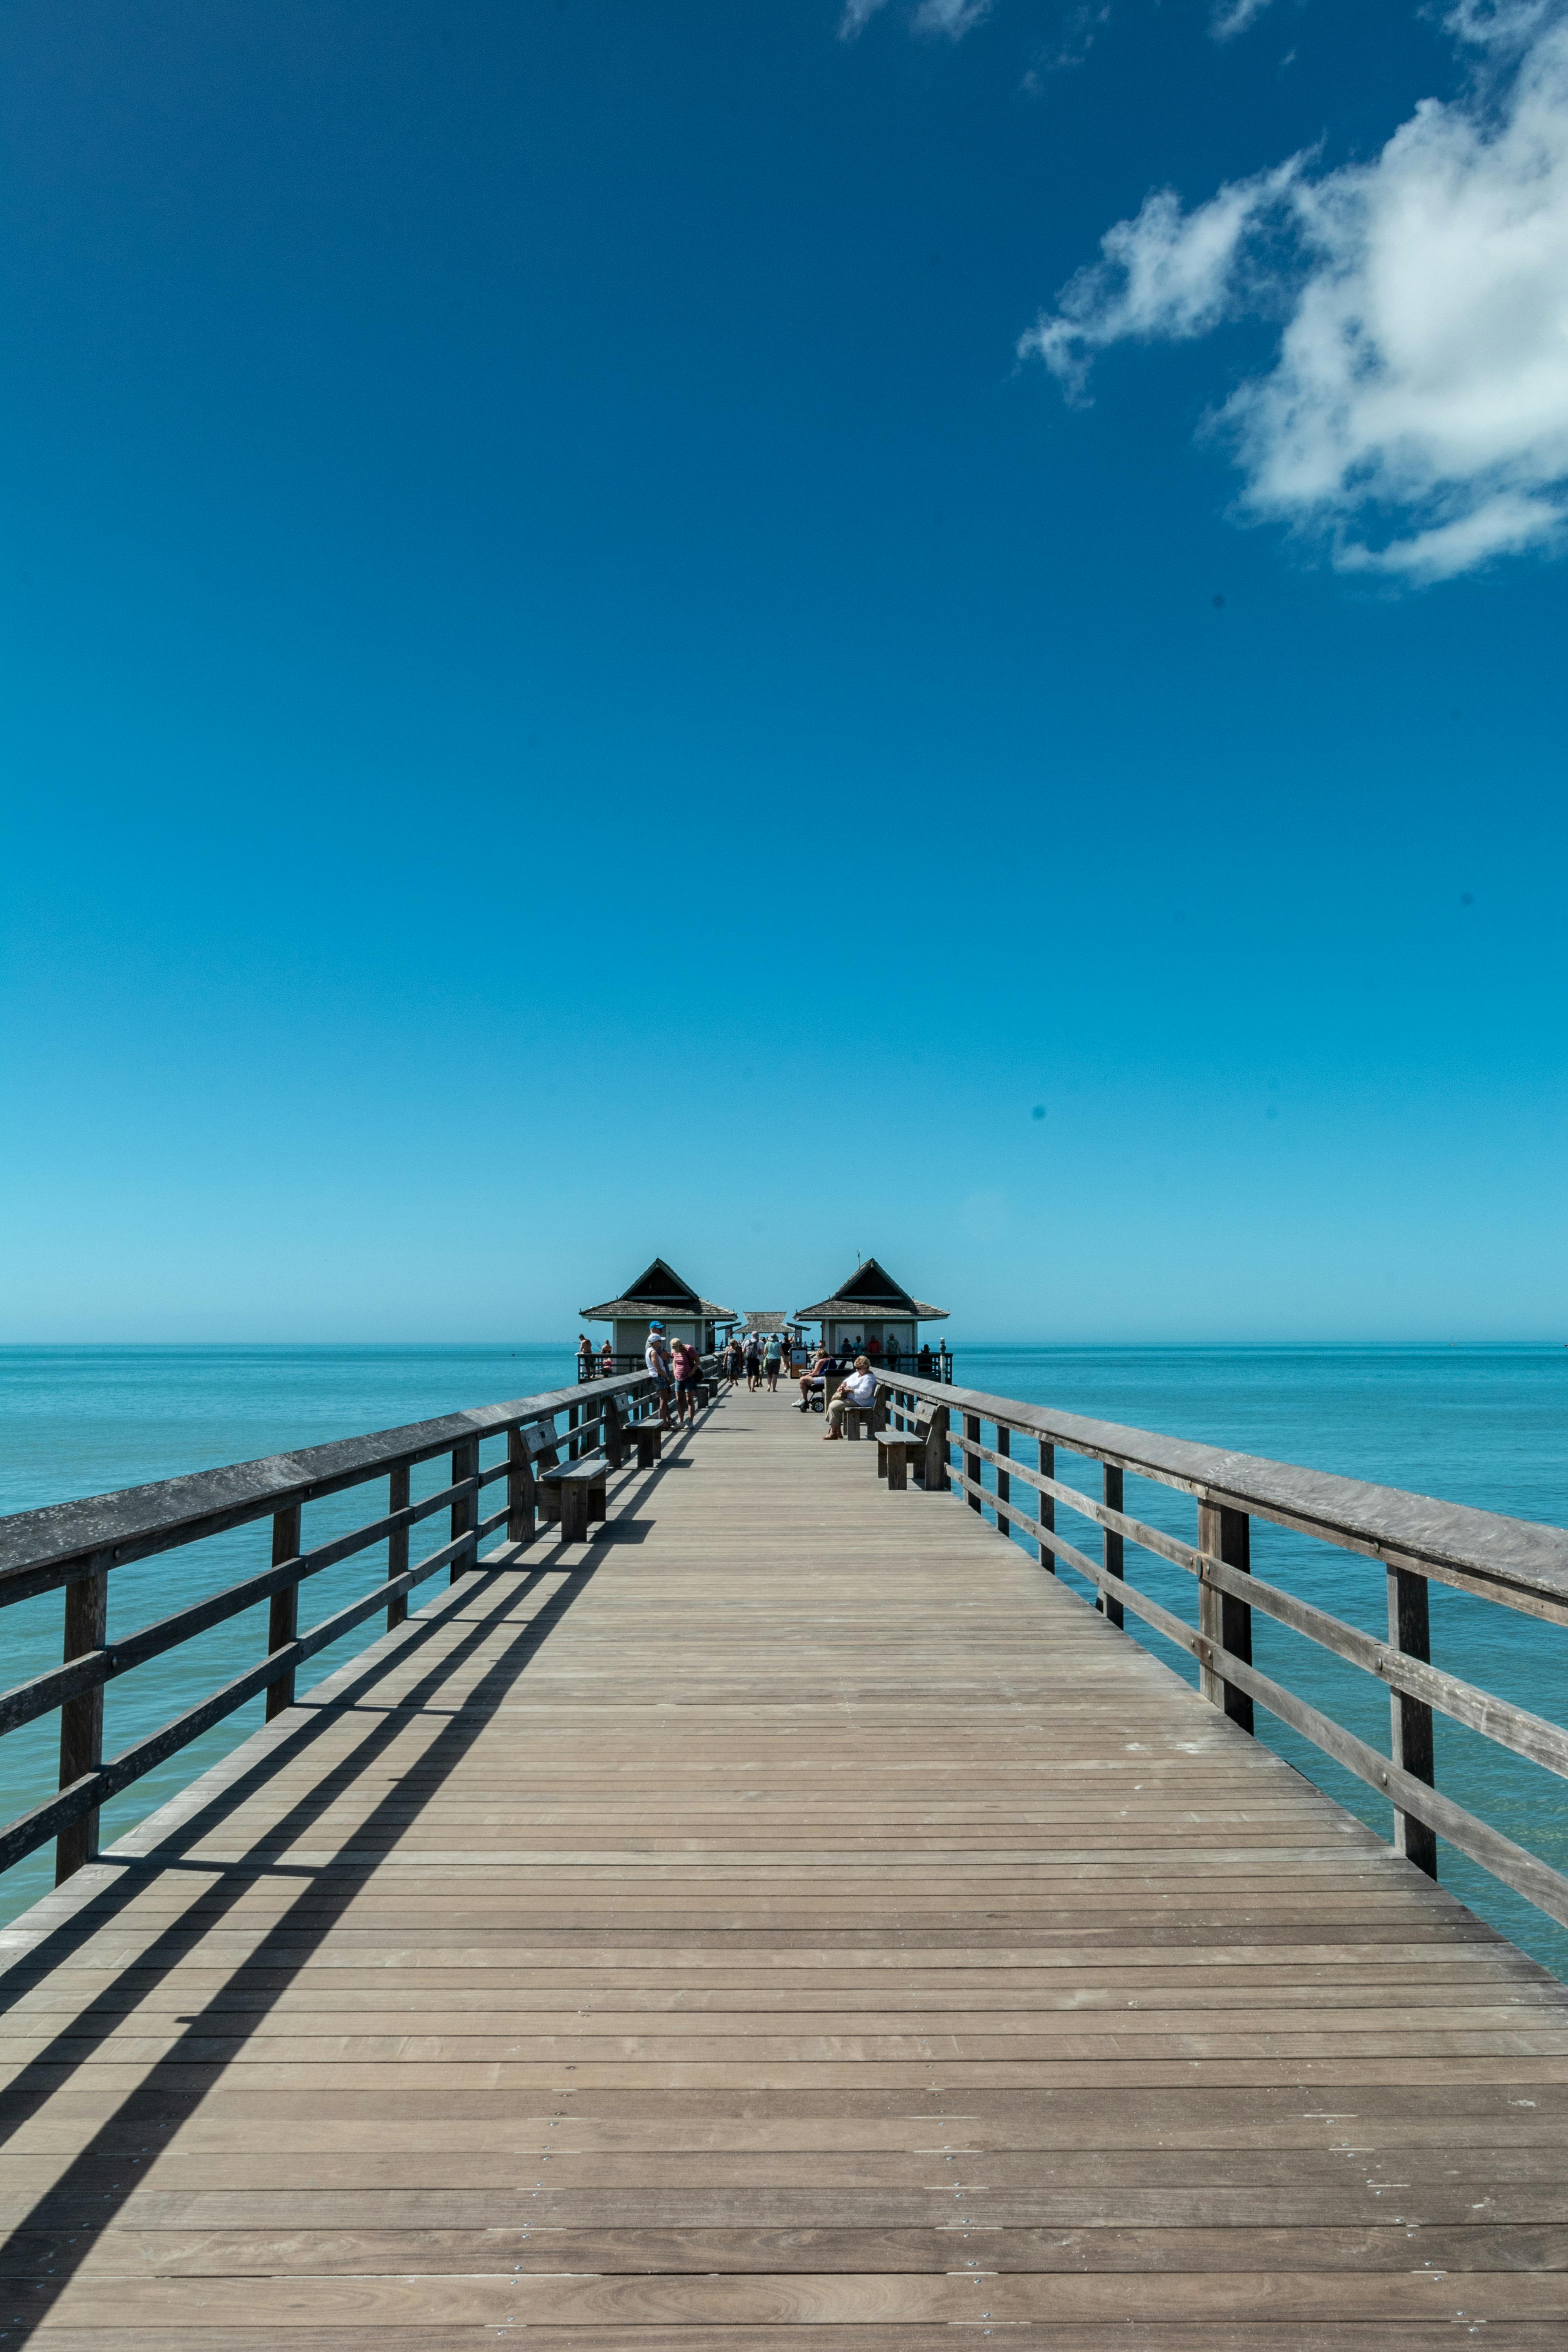 Free stock photo of beach, benches, blue